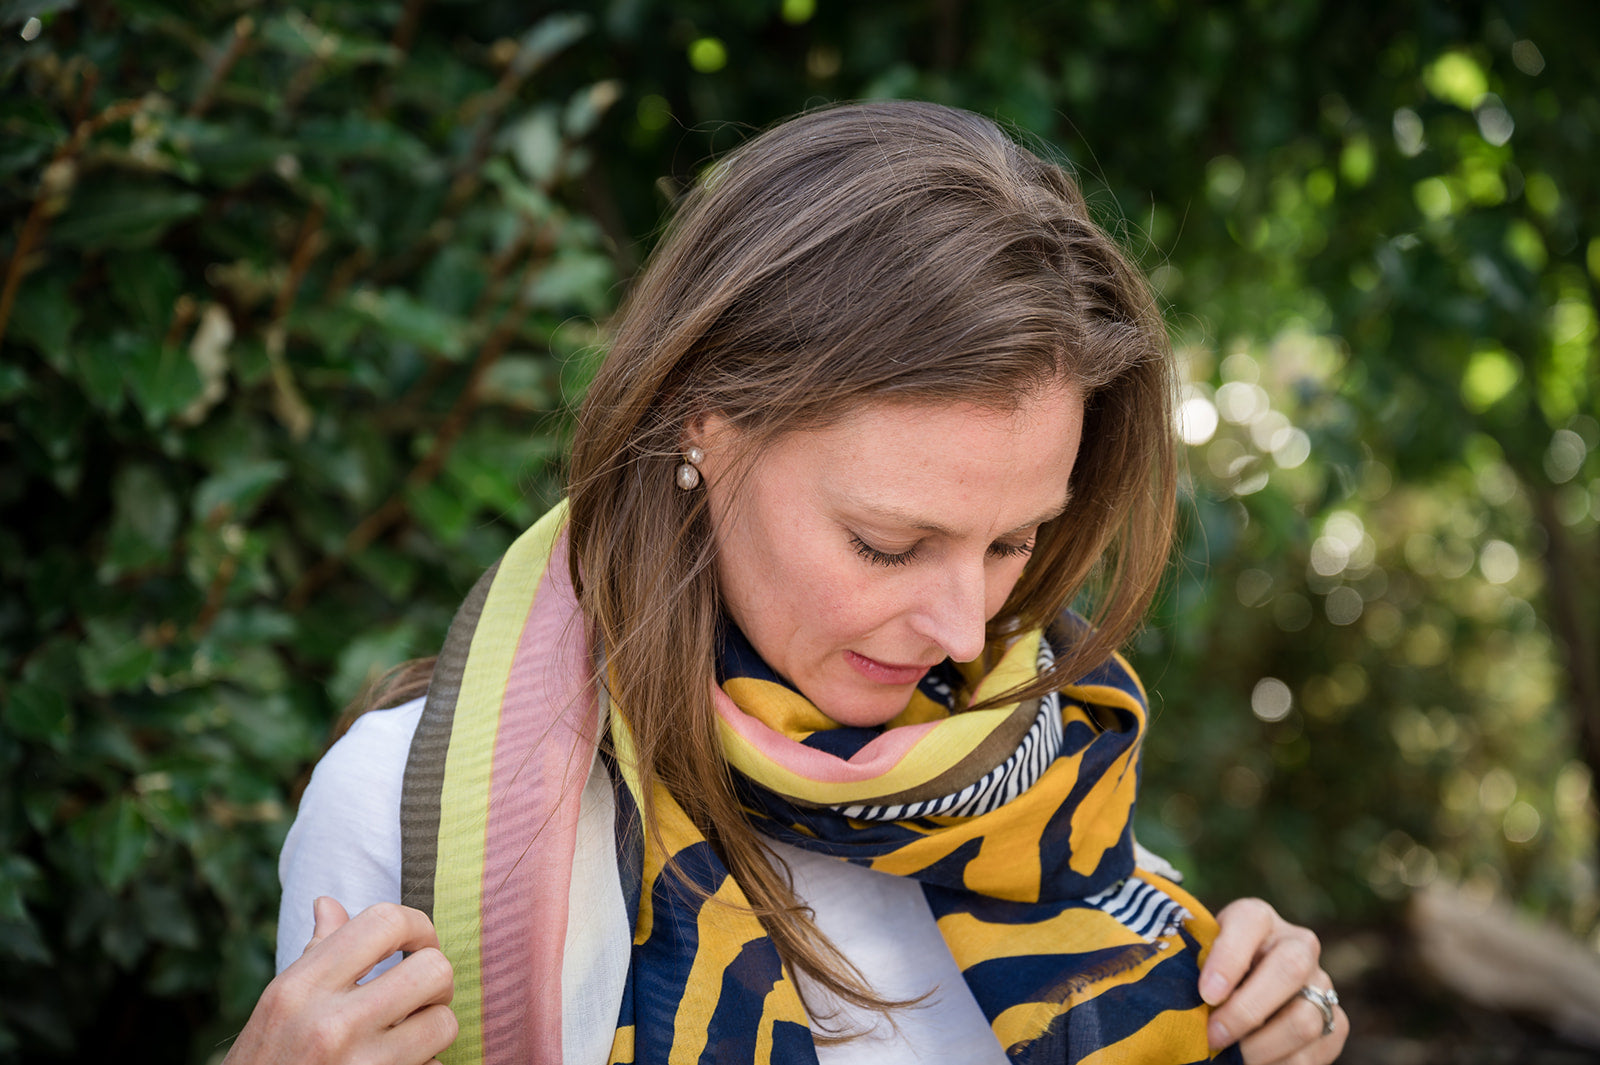 Elevate your style with our bold geometric animal print scarf, a must-have statement accessory. The mesmerizing blend of mustard, navy, pink, and yellow tones creates a chic and modern look. Finished with frayed edges for added texture and a casual vibe, this versatile and lightweight scarf is perfect for turning heads wherever you go. All scarves are crafted from a comfortable polyester blend.